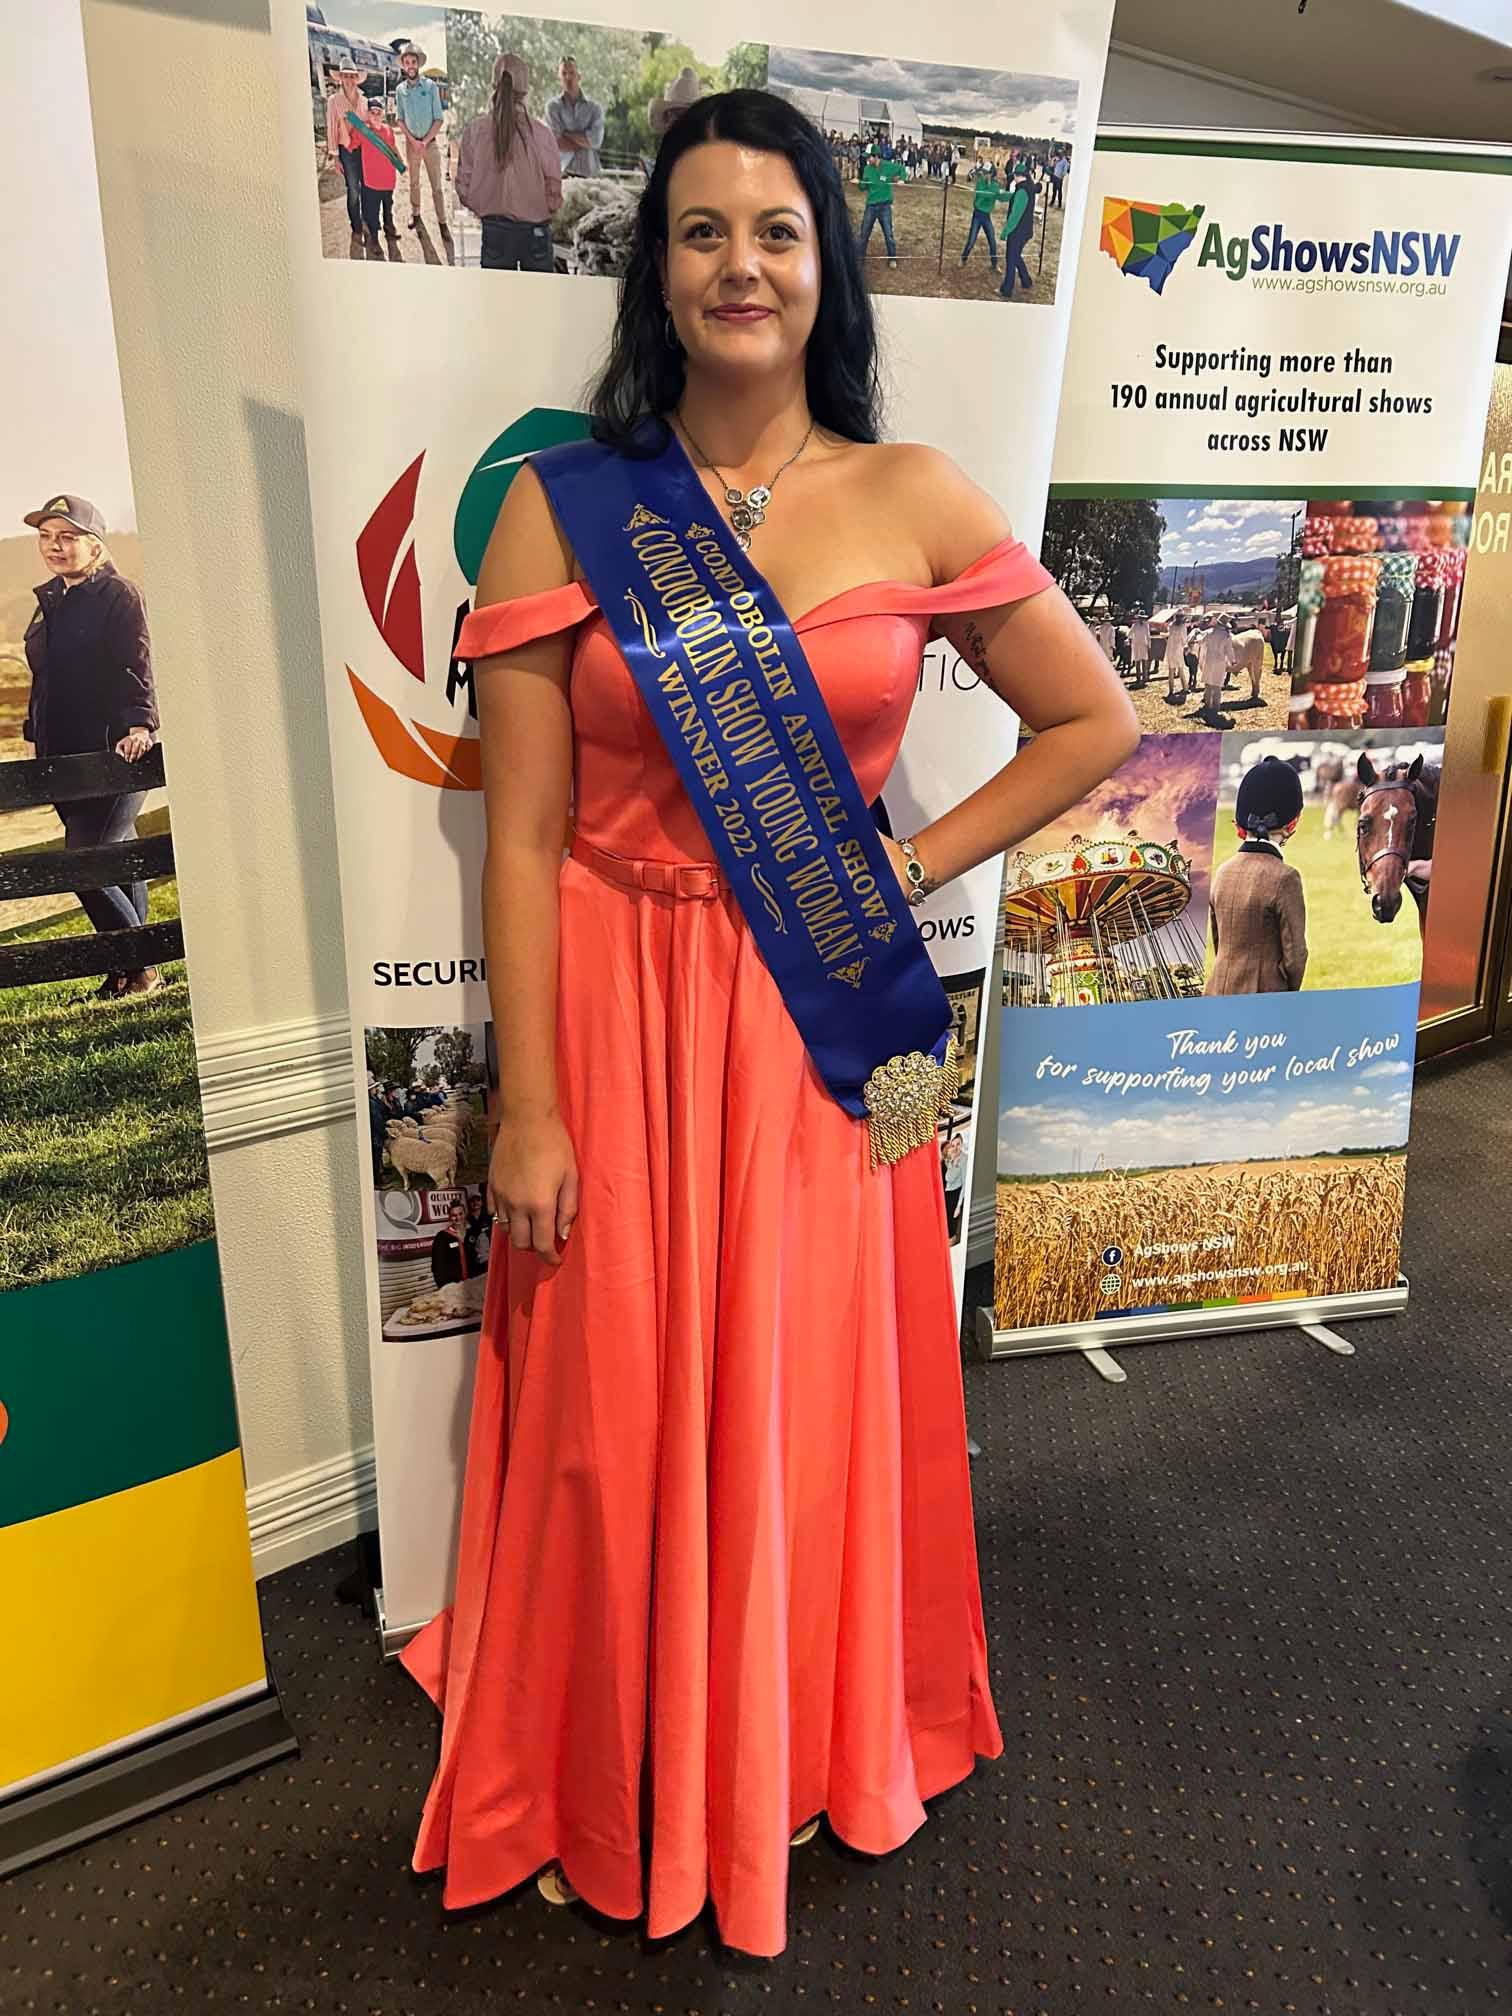 Alessandra Chamen was one of 20 entrants who impressed the judges at the The Land Sydney Royal AgShows NSW Young Woman competition. While she was nor chosen as one of the three finalists to move onto Sydney, she had a wonderful time representing her community. Image Credit: Condobolin Show Society Facebook Page.